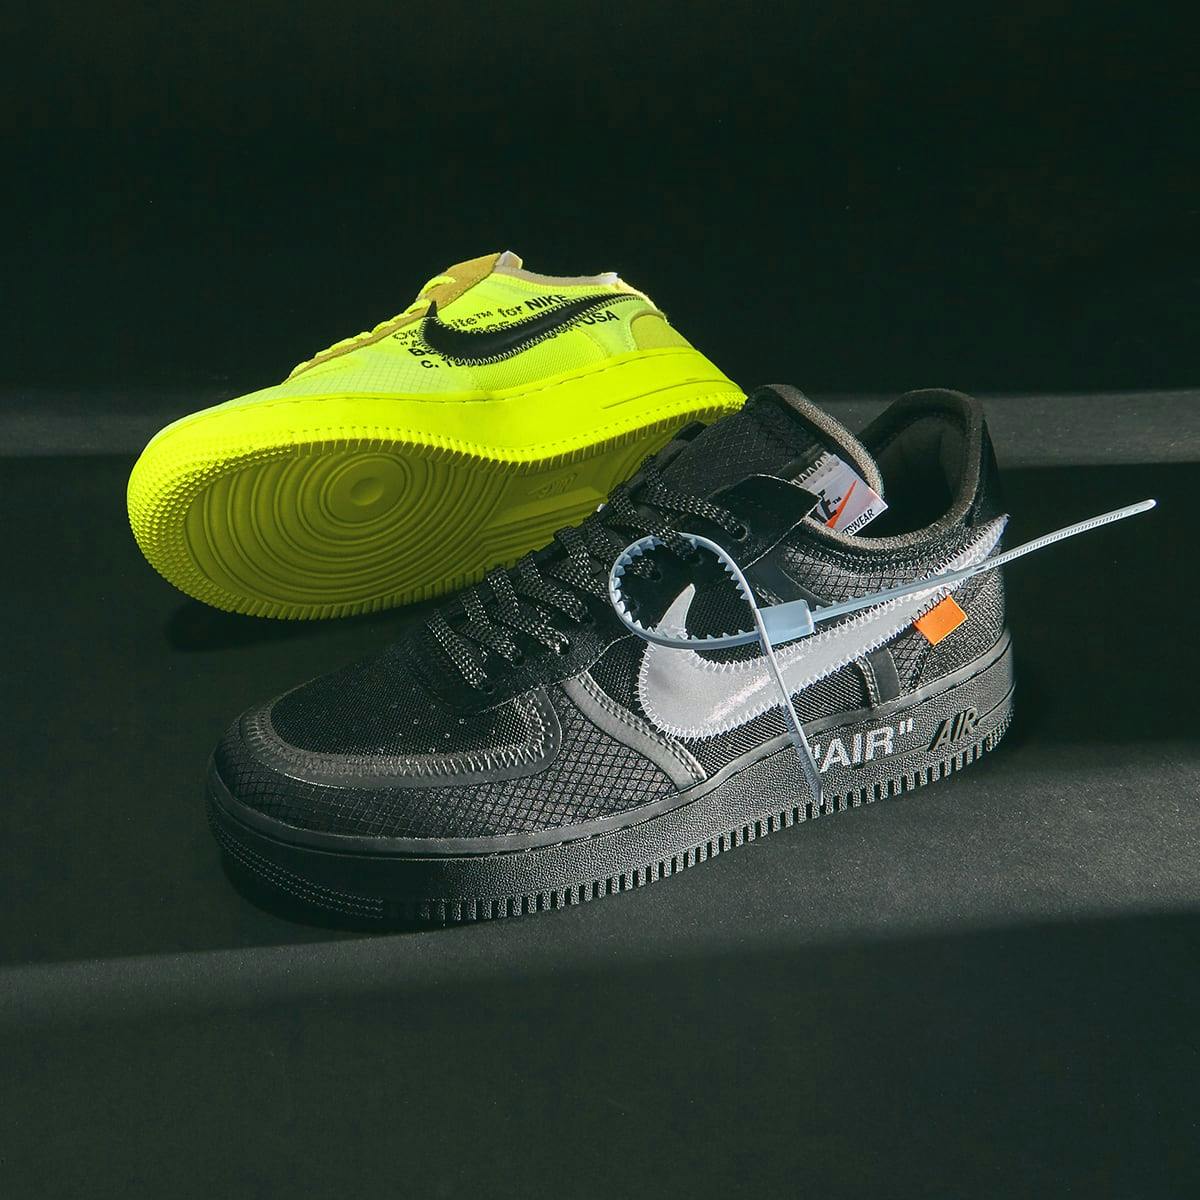 B/R Kicks - In their element Virgil Abloh — what's been